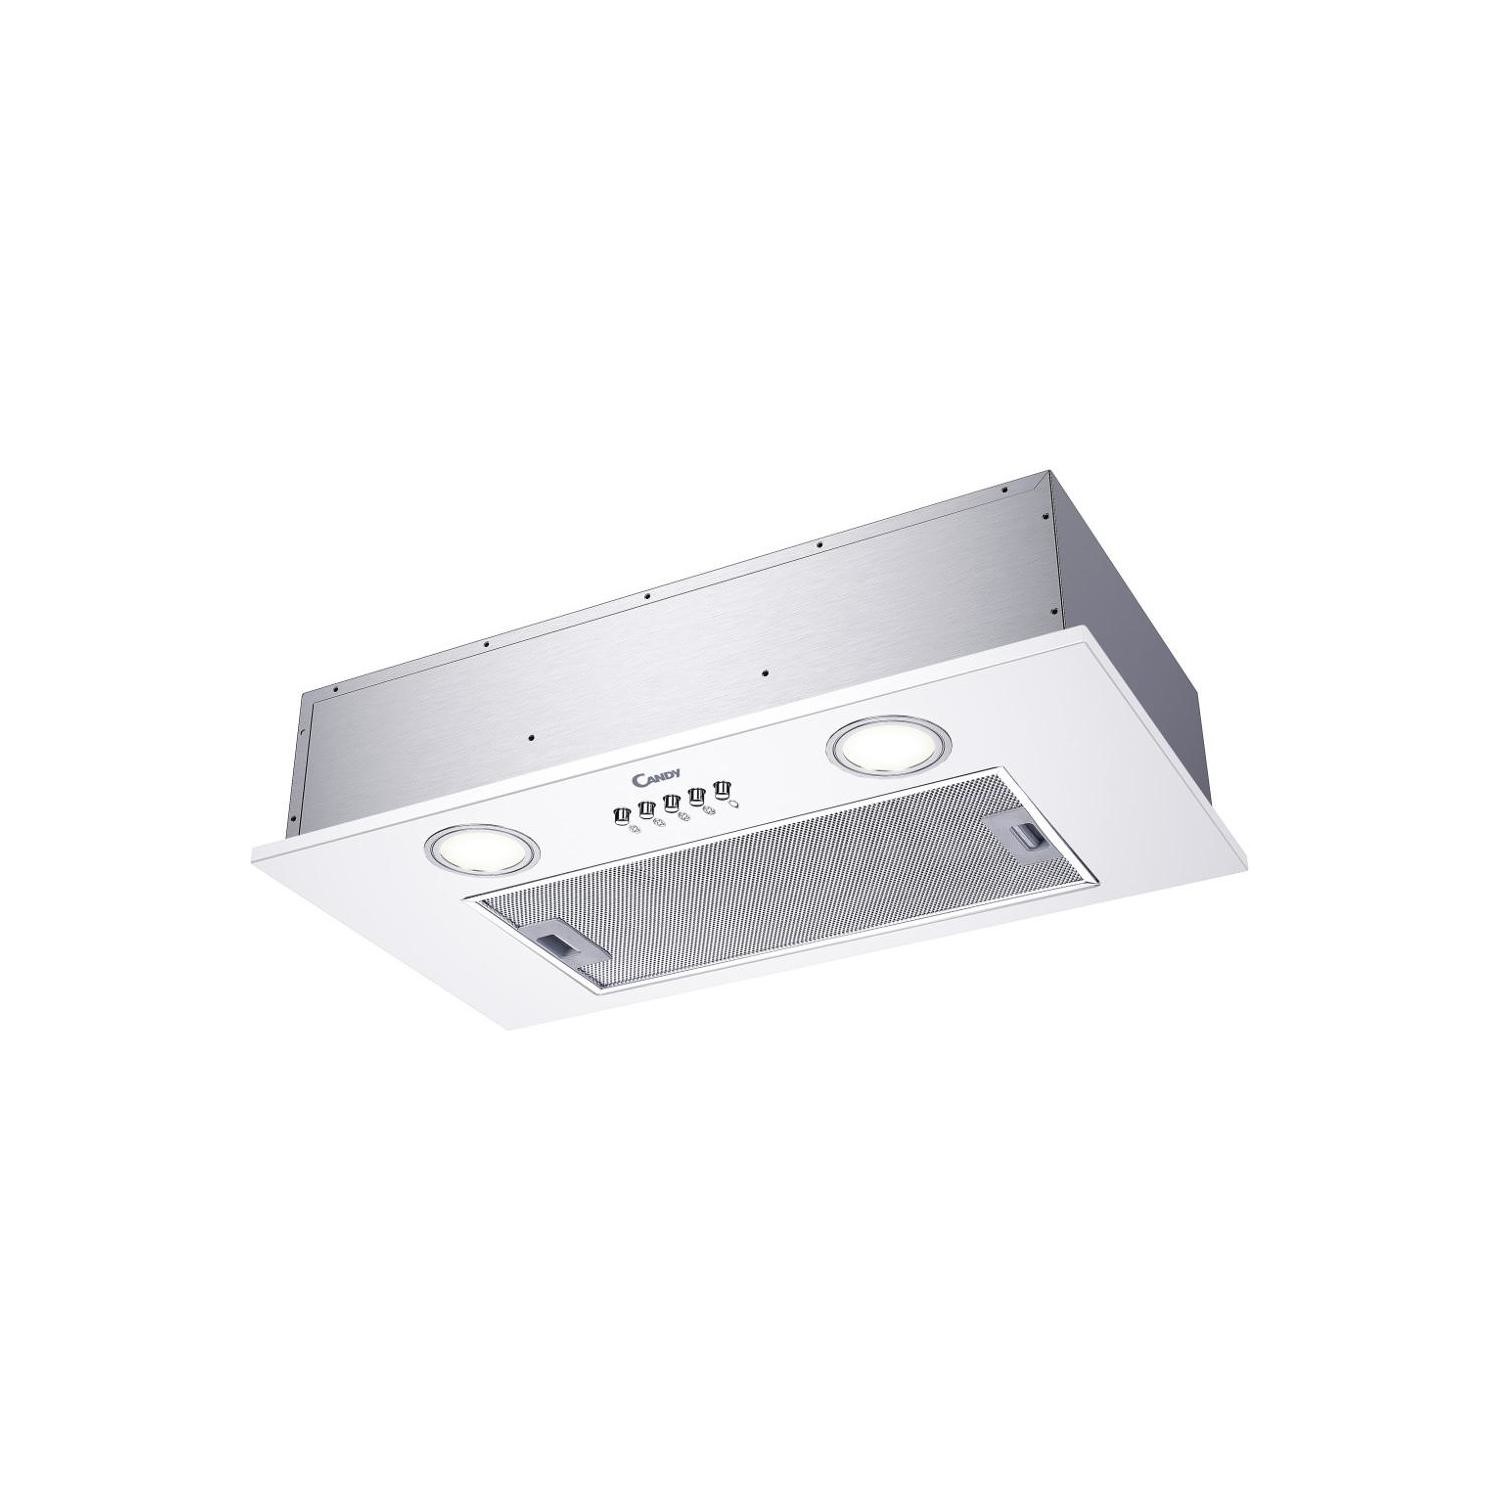 Refurbished Candy CBG625 52cm Canopy Cooker Hood White